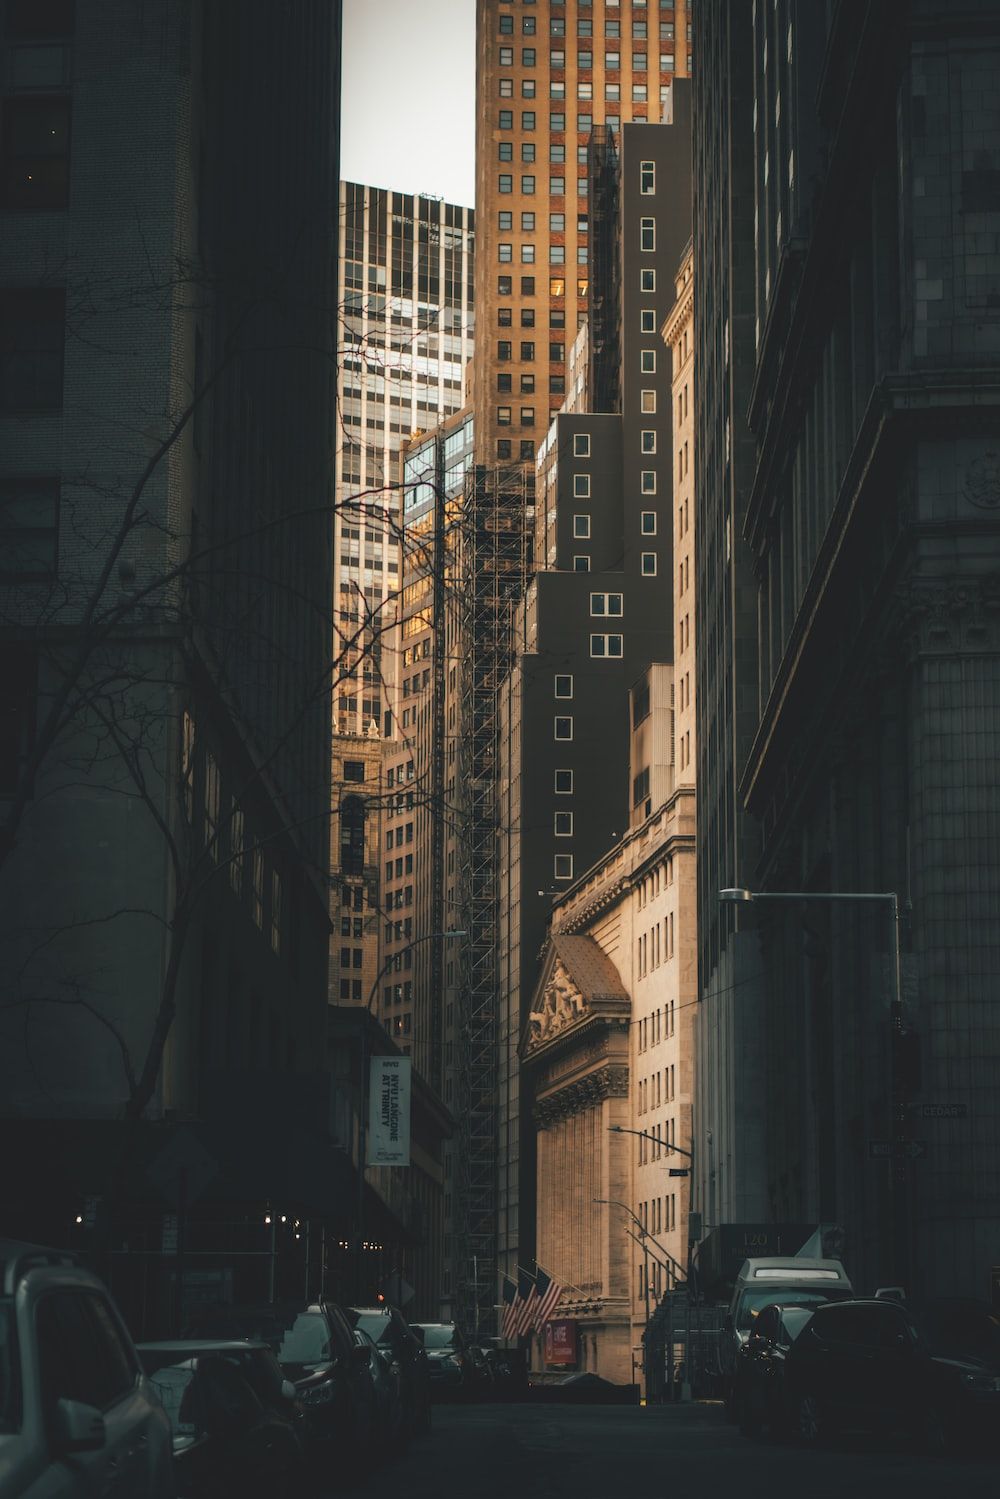 A street view of a city with tall buildings - New York